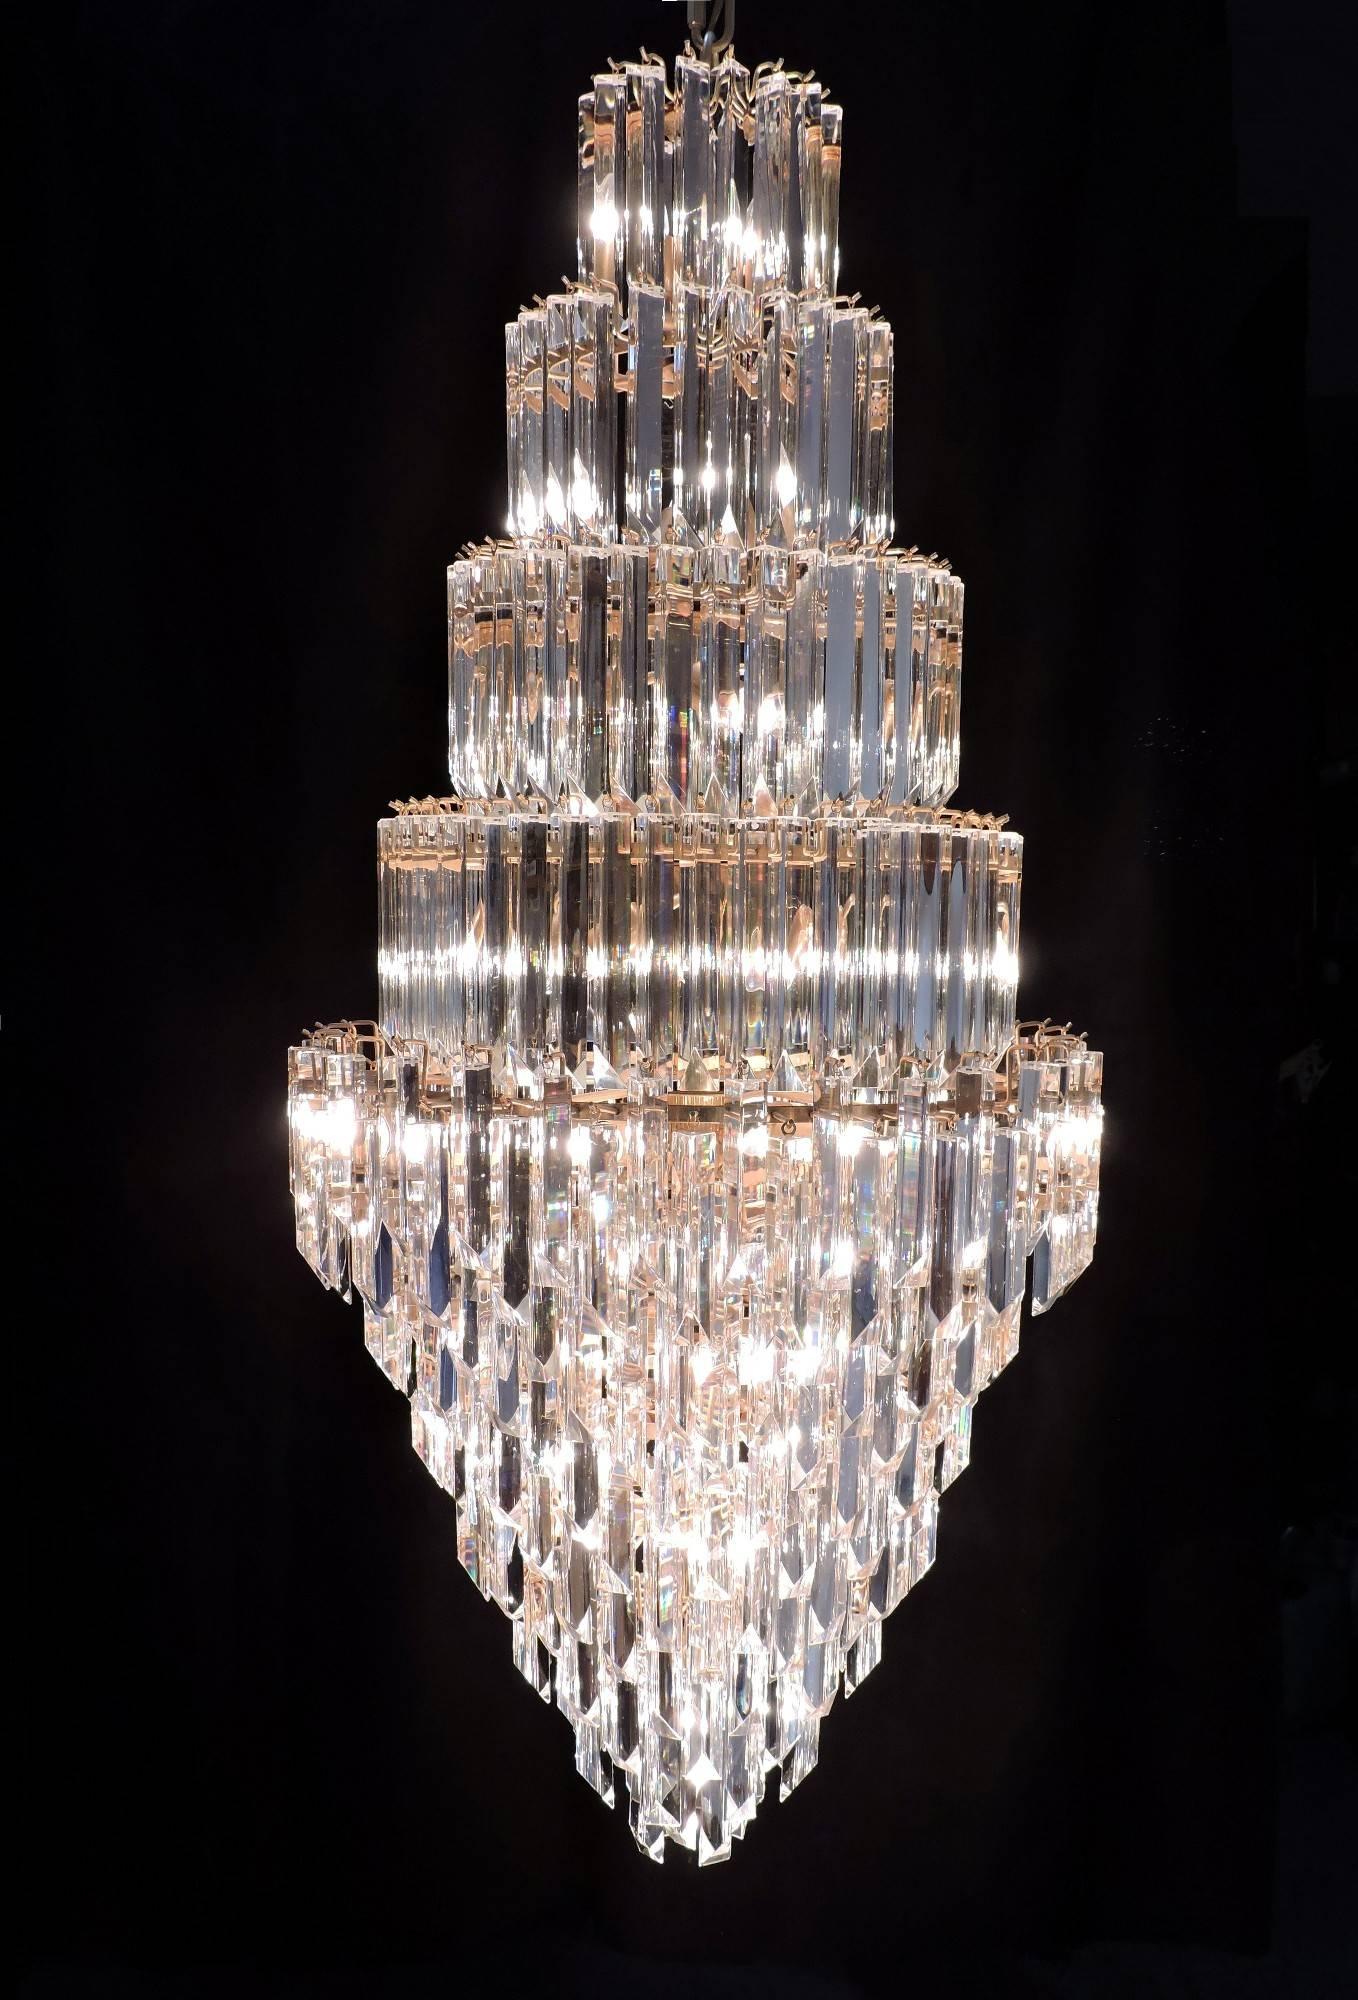 Spectacular Murano multi-tiered glass prism chandelier. This huge light fixture is almost 5 feet high and has hundreds of high quality three-sided prisms arranged in layers on a brass framework. It takes twenty-three 60 watt max standard base bulbs.